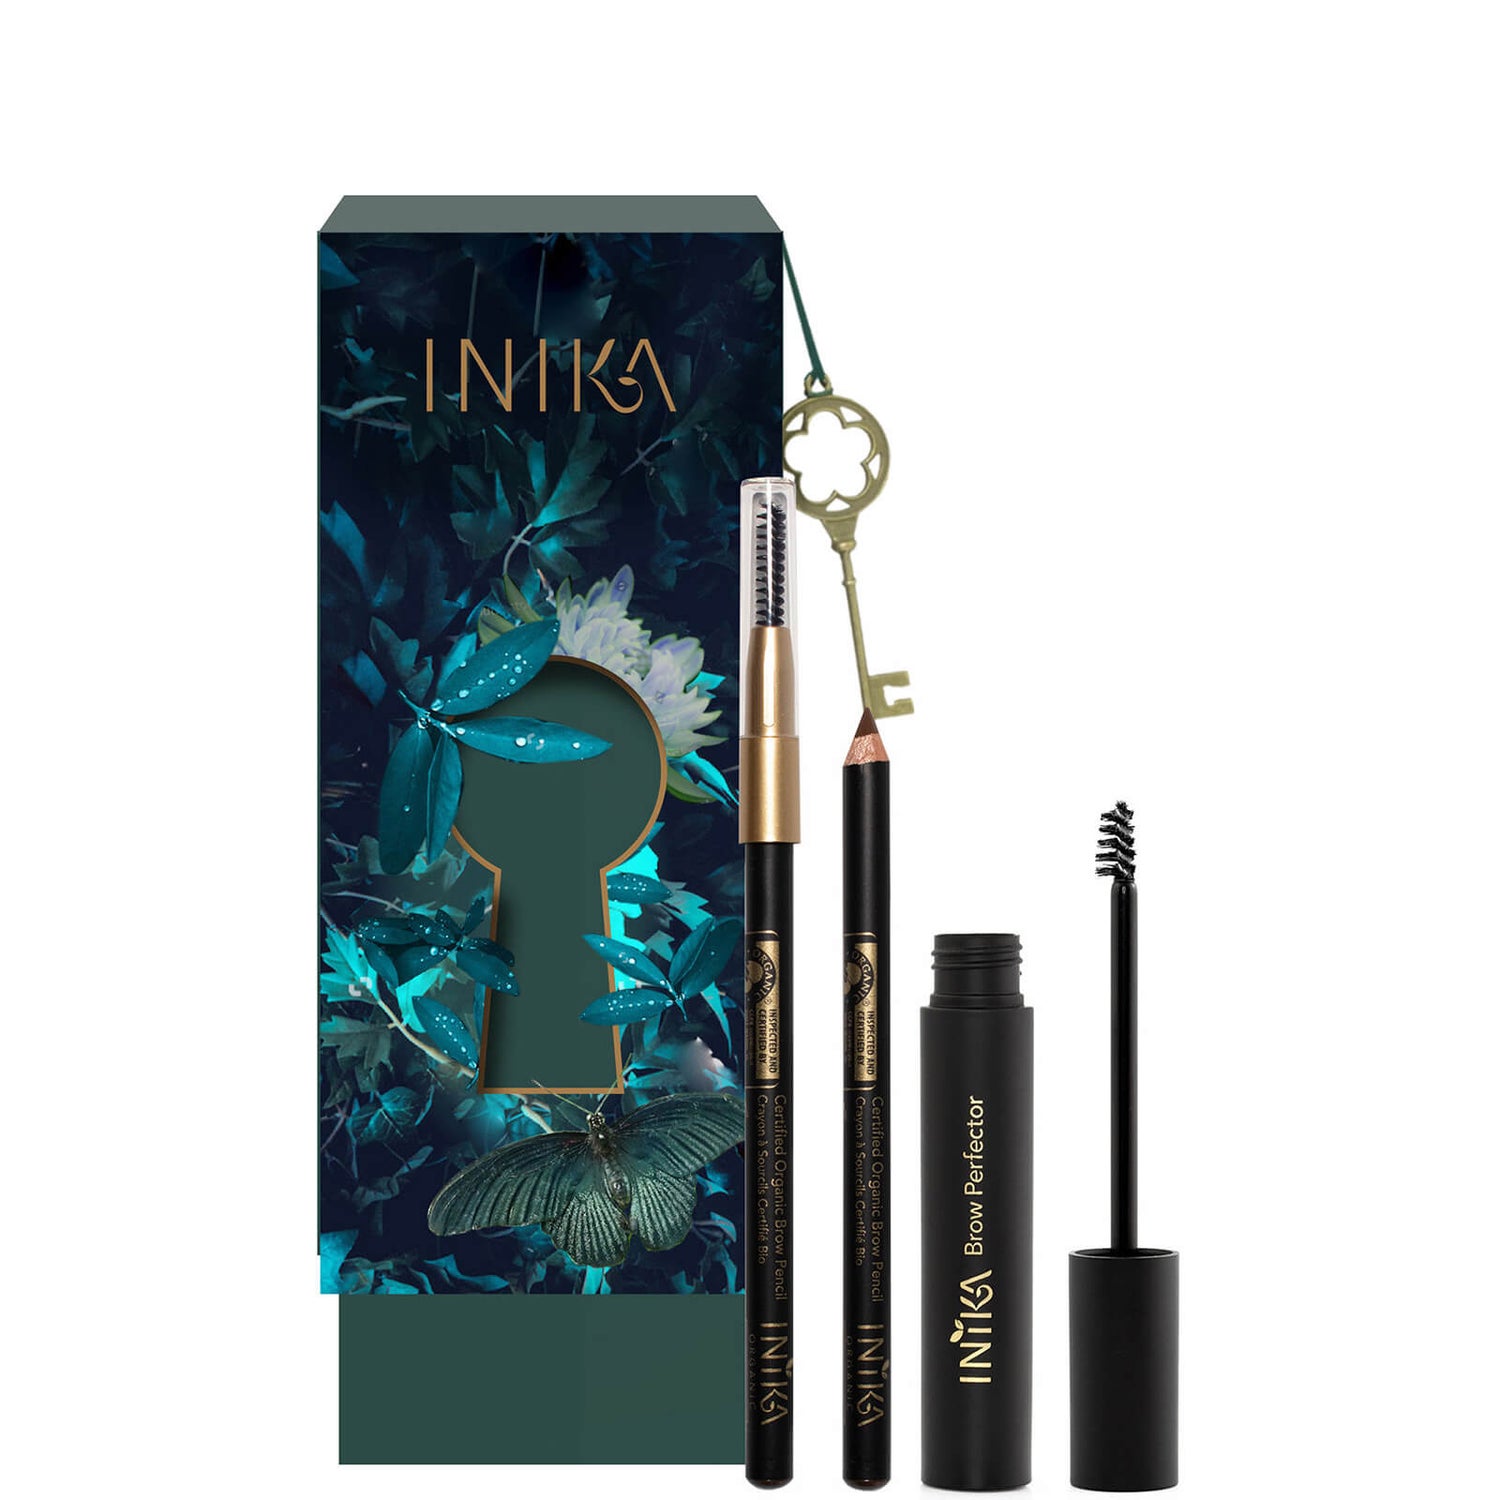 INIKA Certified Organic Precision Brows - Walnut and Brunette 9.2g (Worth £41.00)